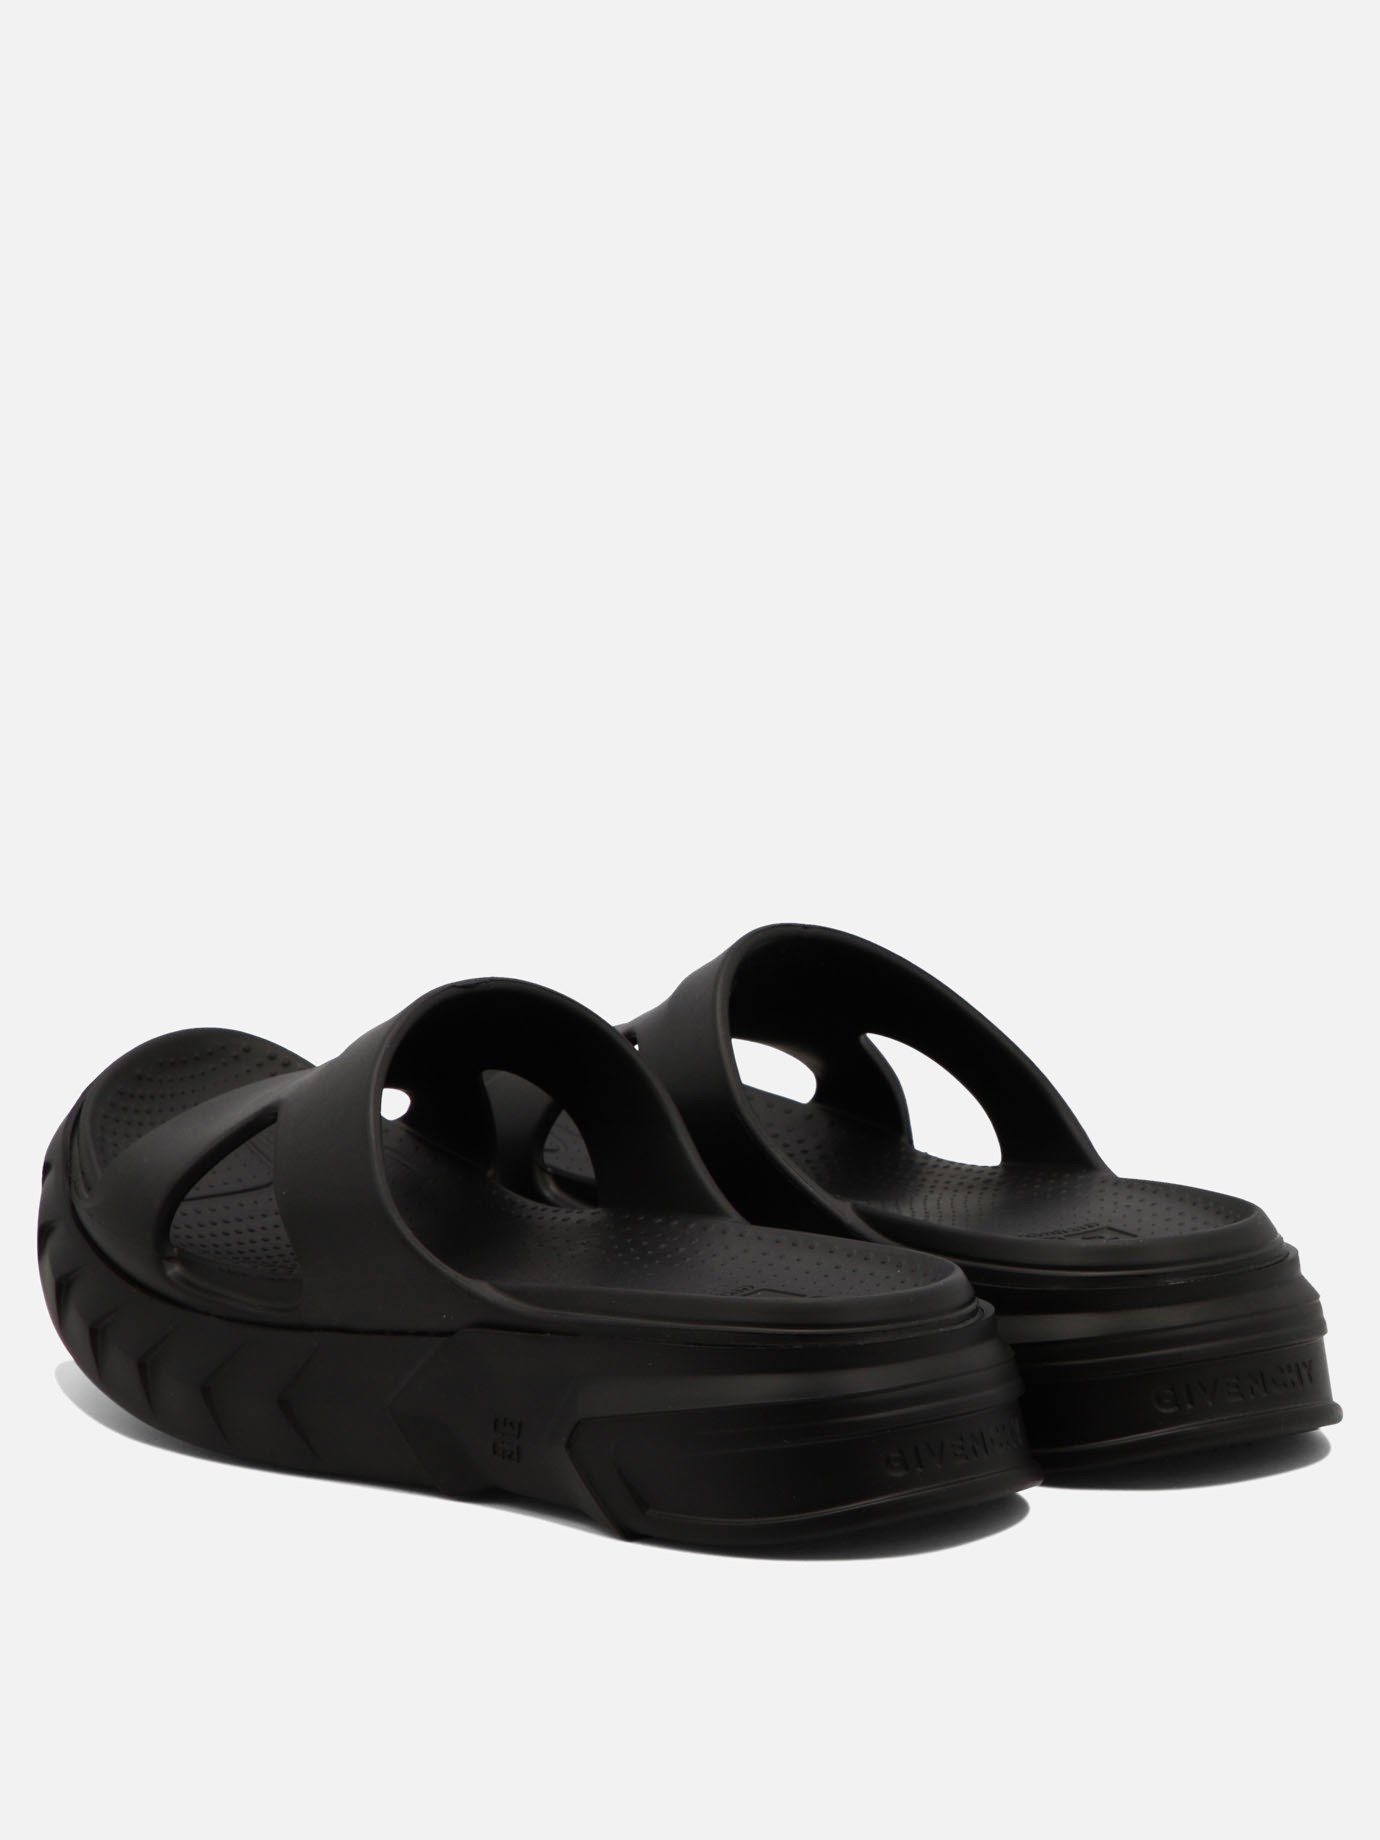  Marshmallow  sandals by Givenchy